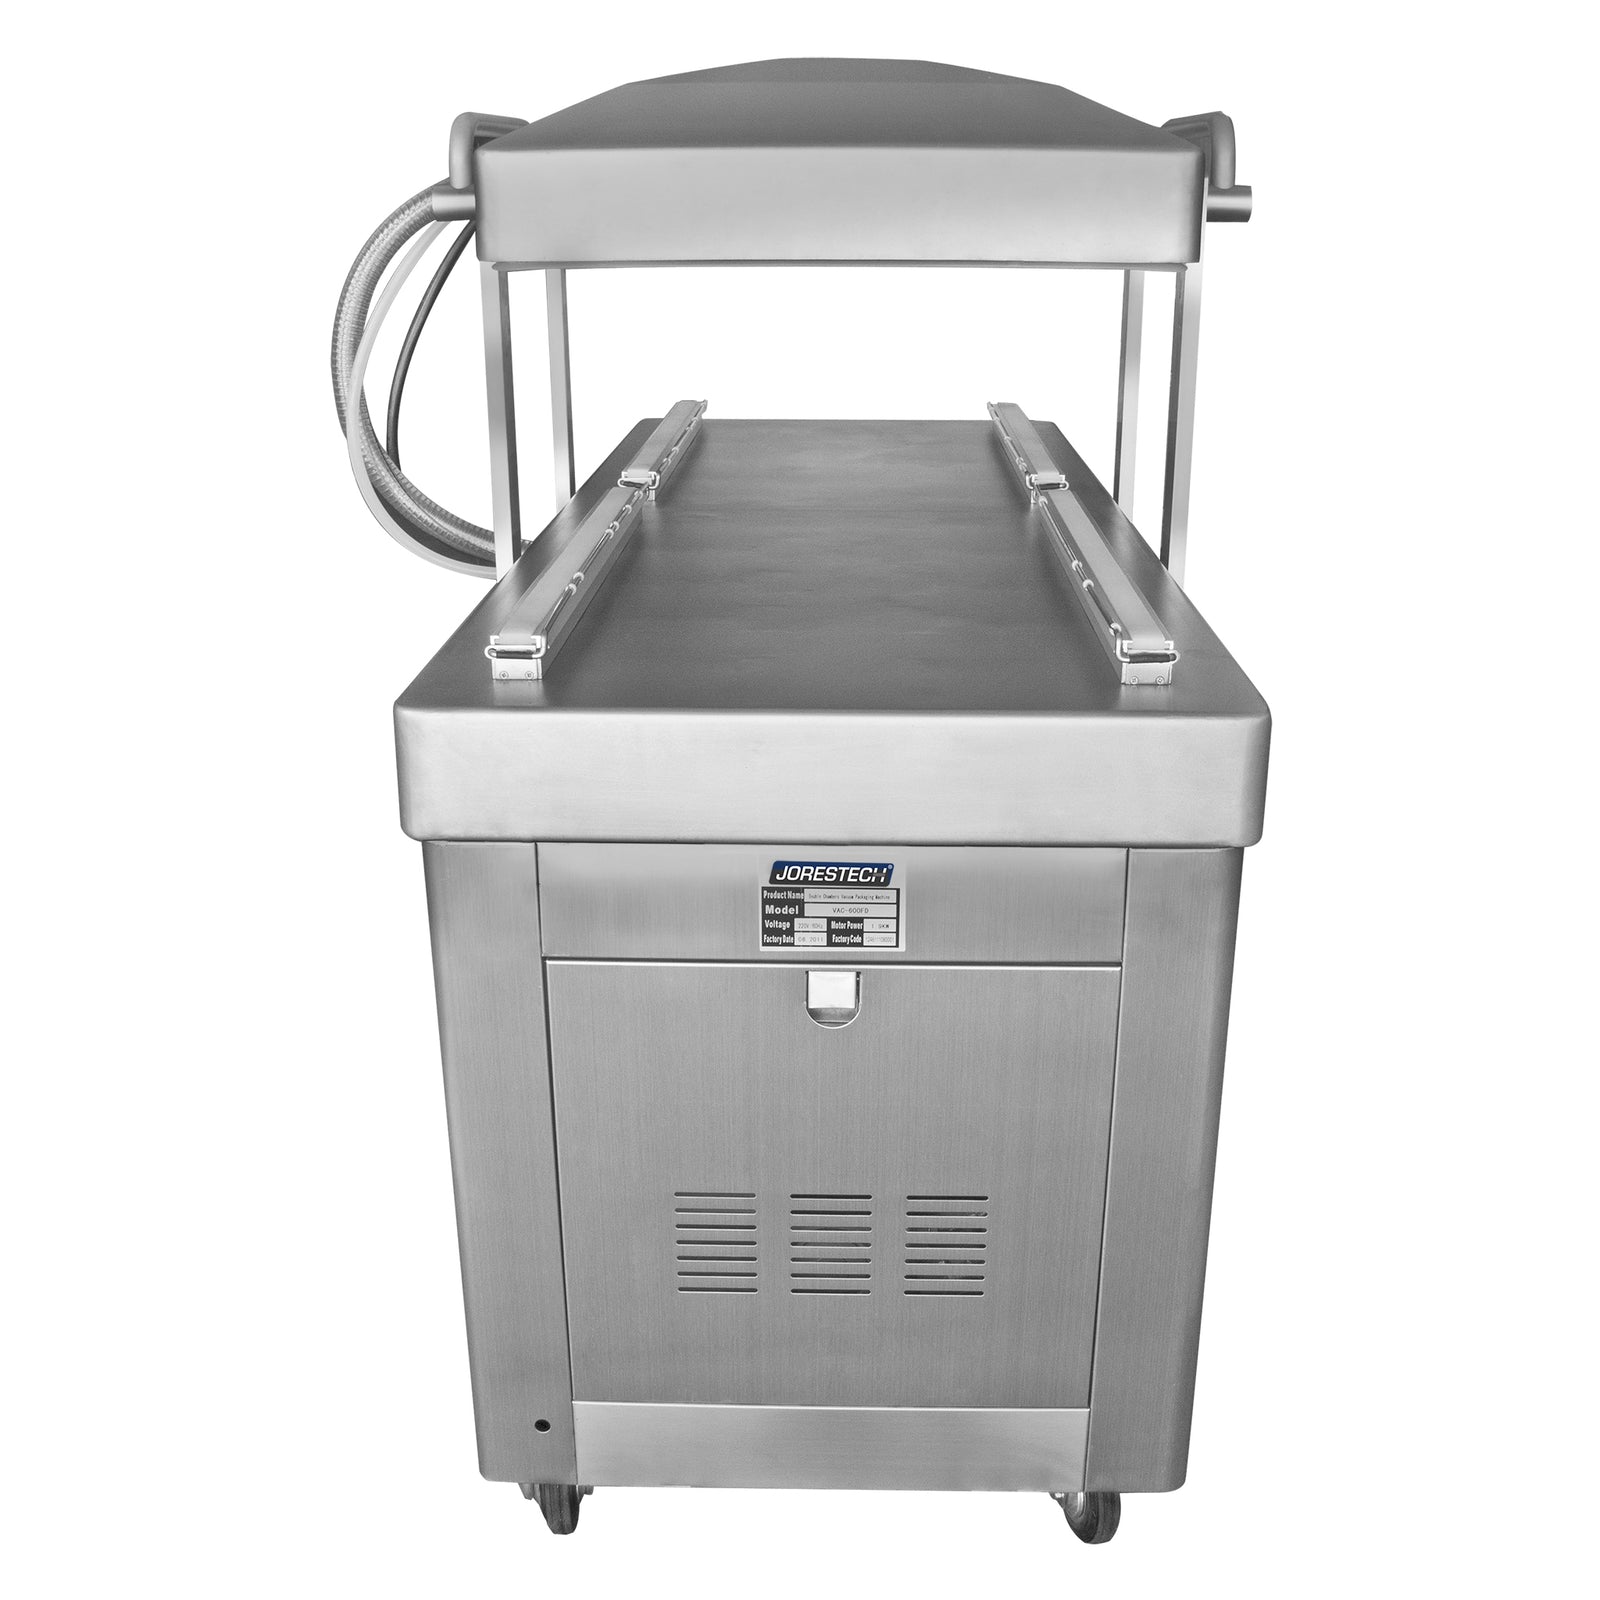 TECHTONGDA Commercial Two Chamber Vacuum Packaging Machine Stainless Steel  Food Sealing Machine 220V